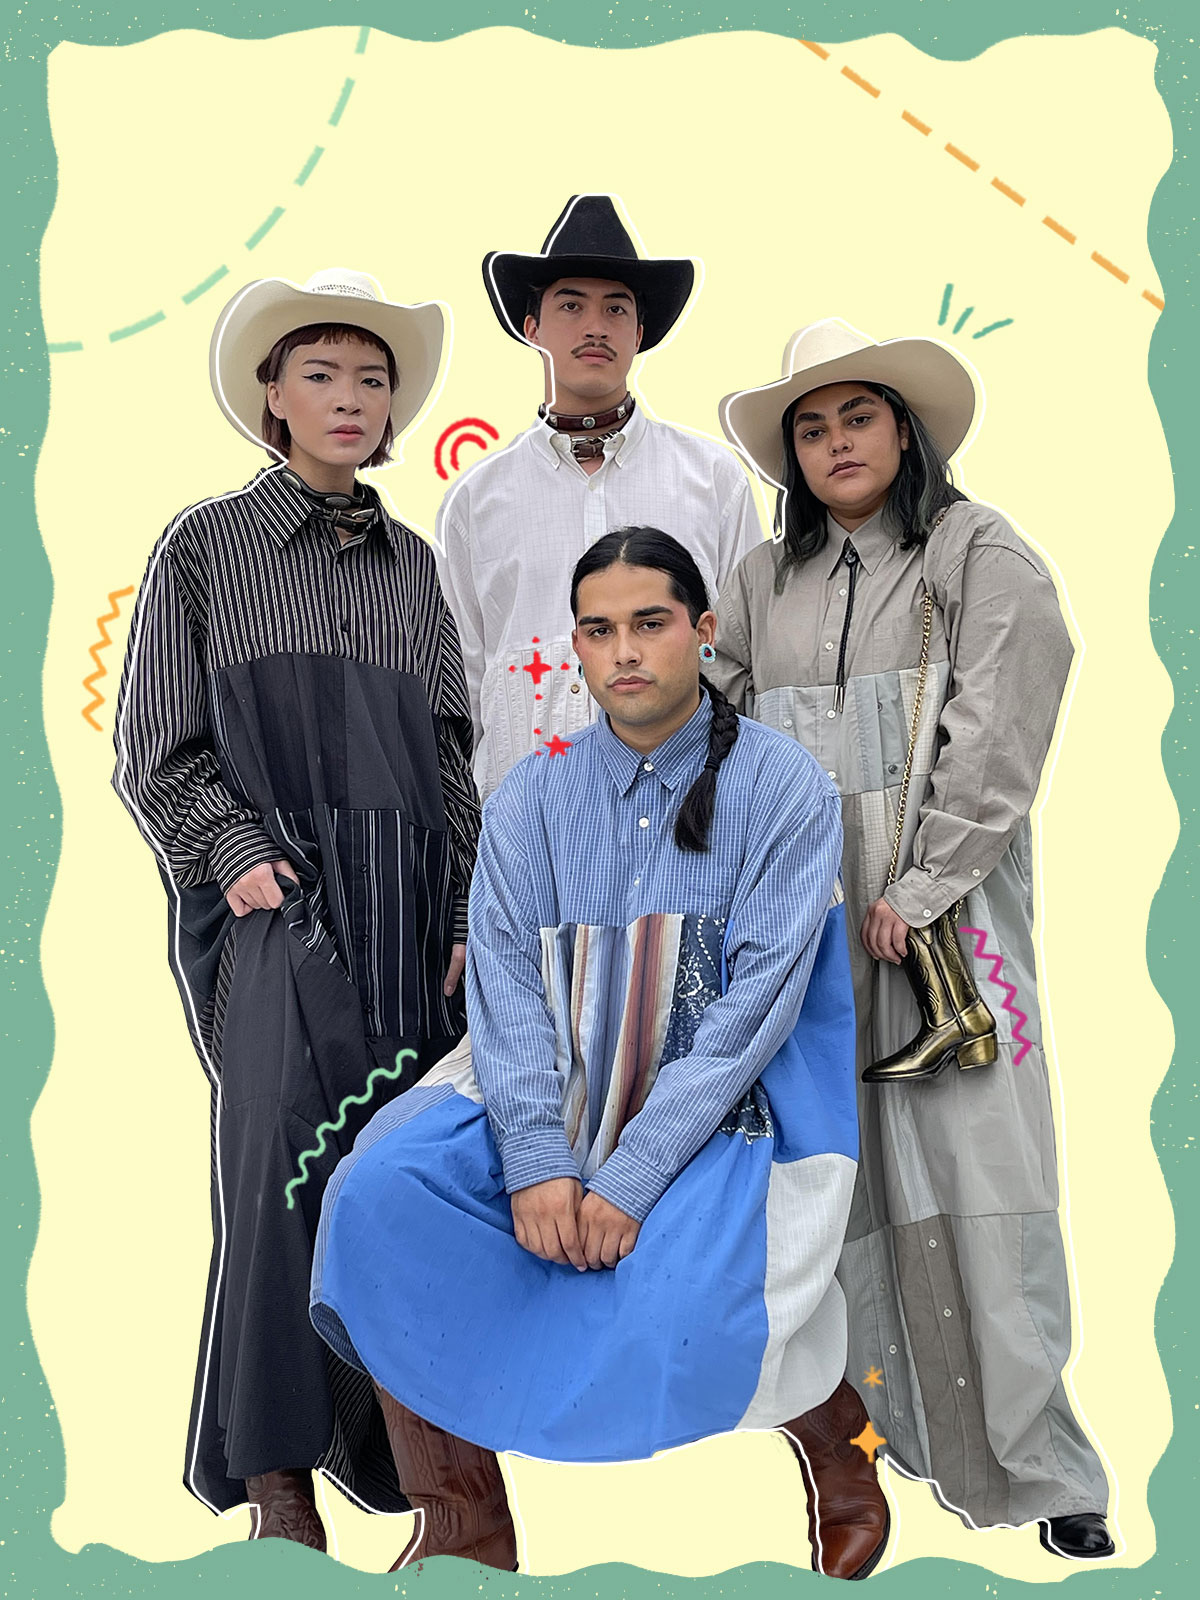 Four people wearing cowboy hats and long tunic shirts with drawn graphics around them